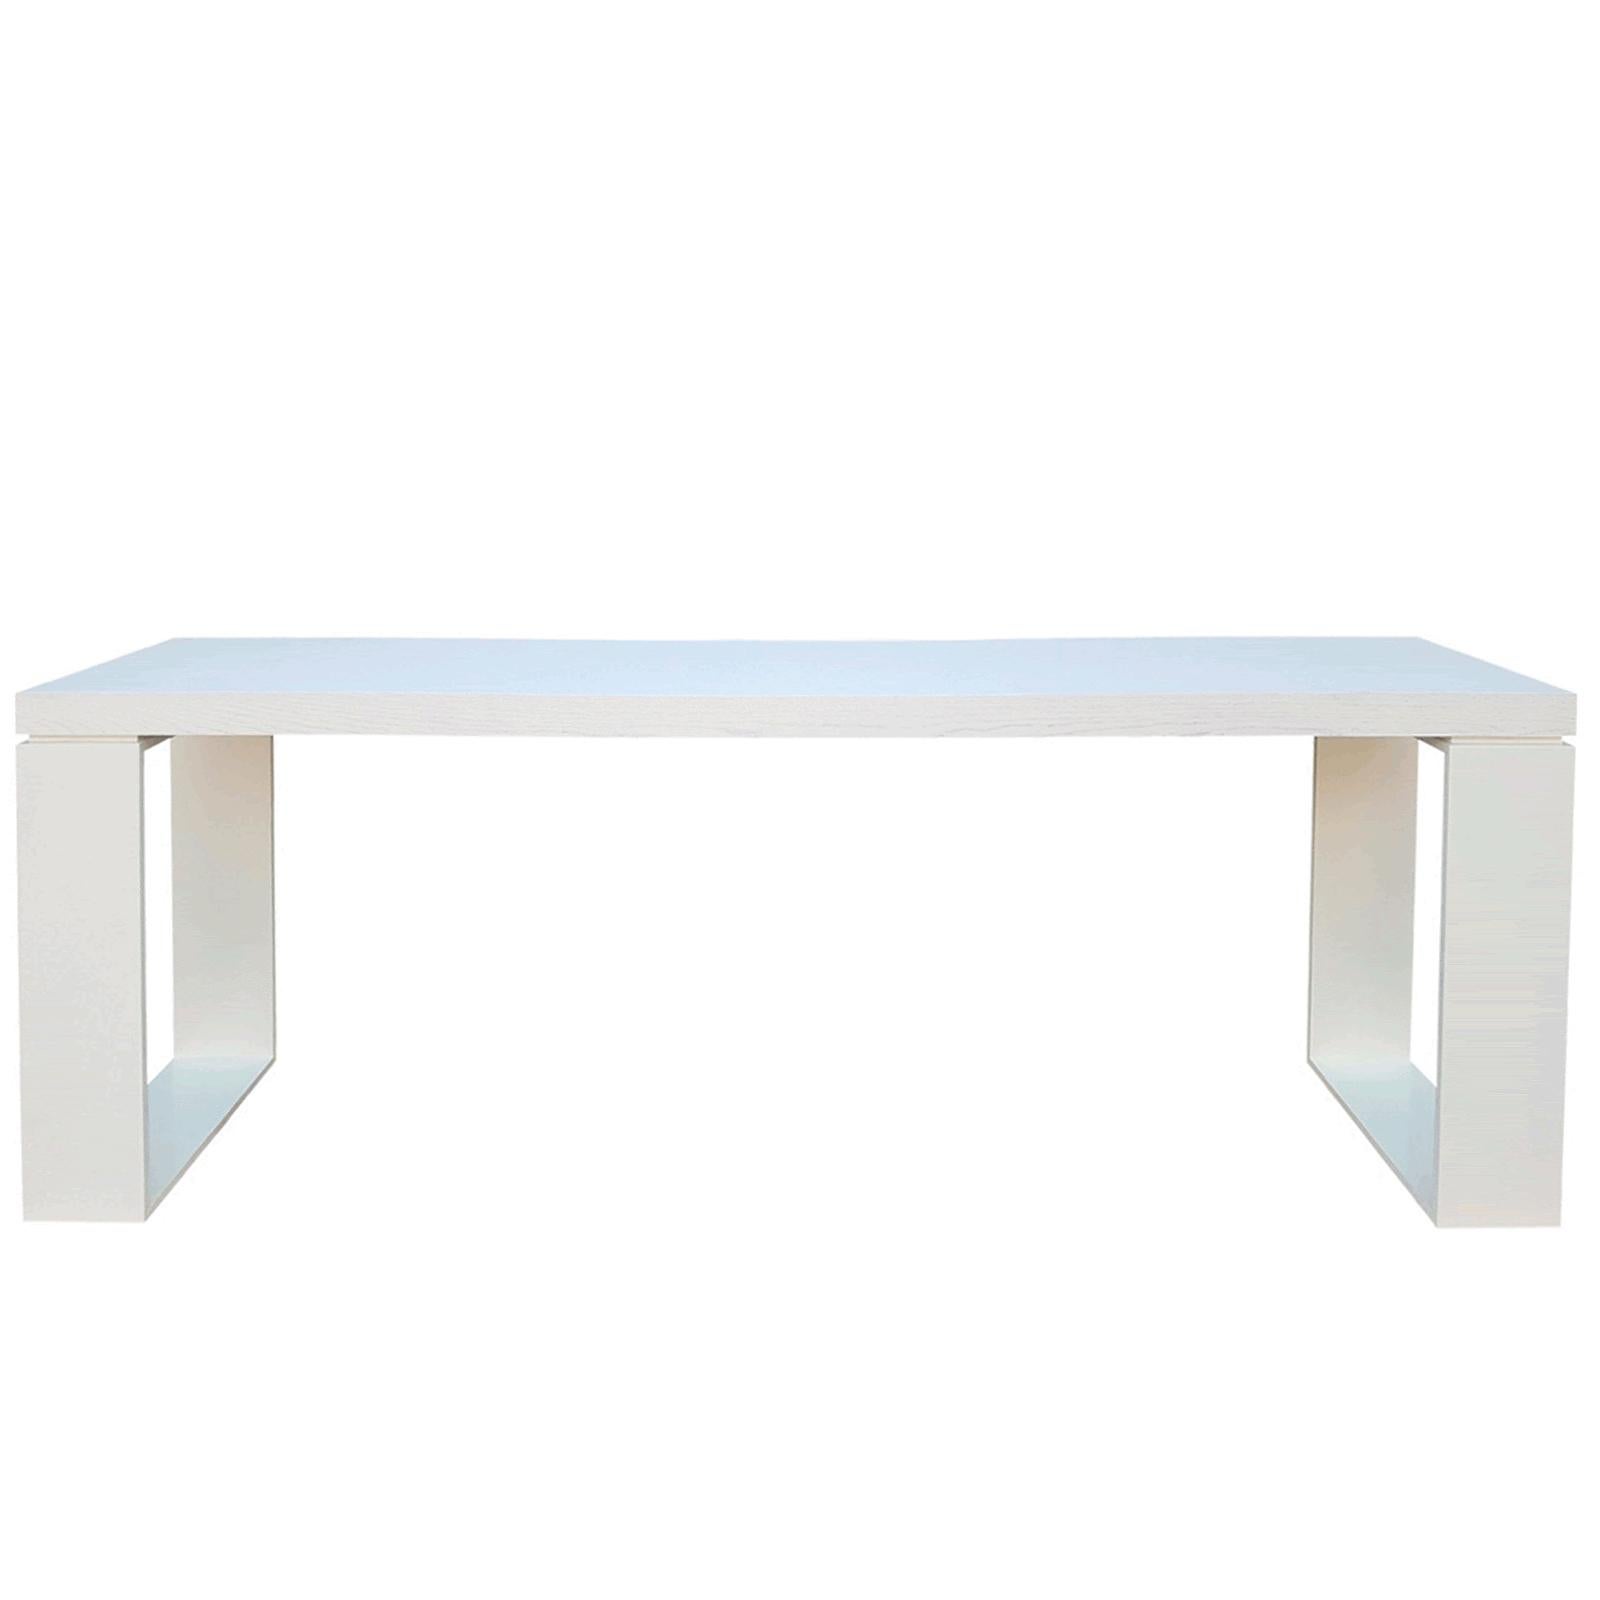 Stunning Simplicity. Entry Halls, sofa tables or bedside our Cubed console is a smart addition to any room ! Custom Sizes / Finishes are available.